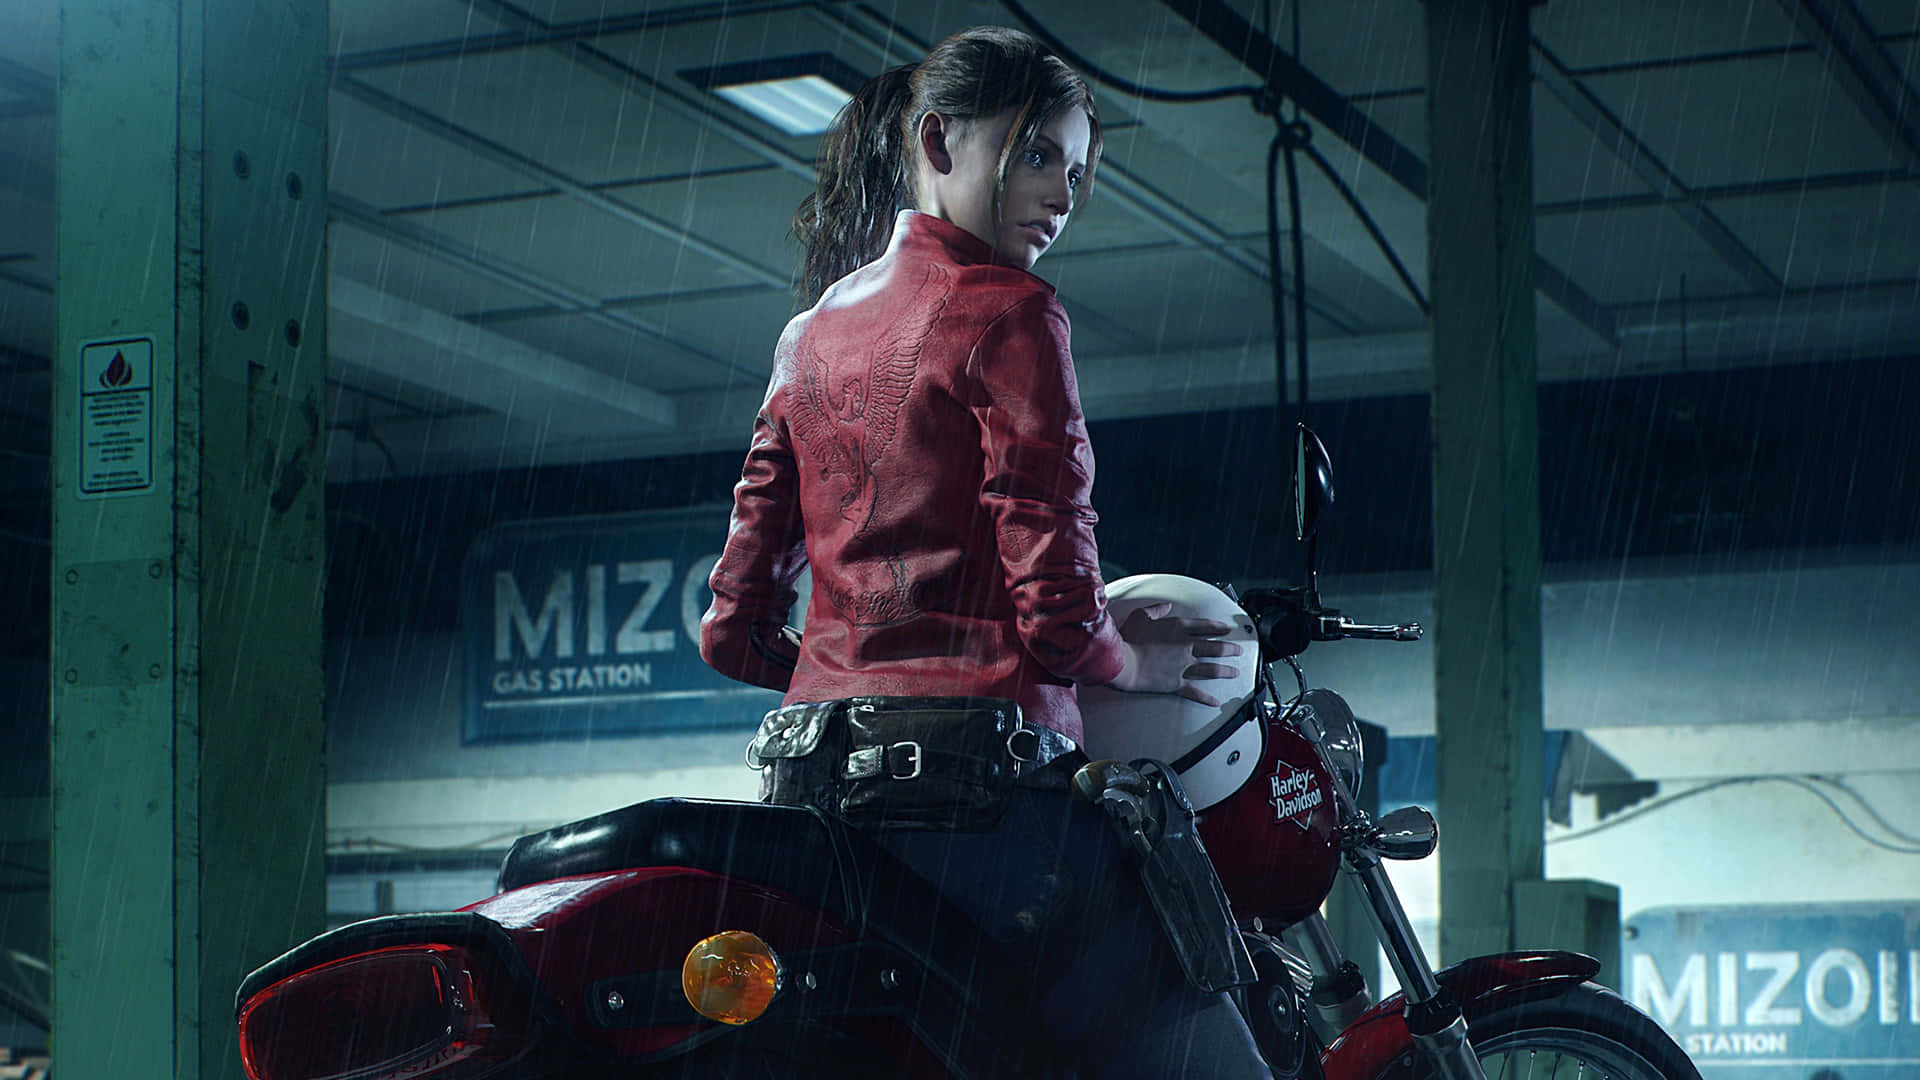 Image  Claire Redfield Defending Against a Zombie Attack Wallpaper